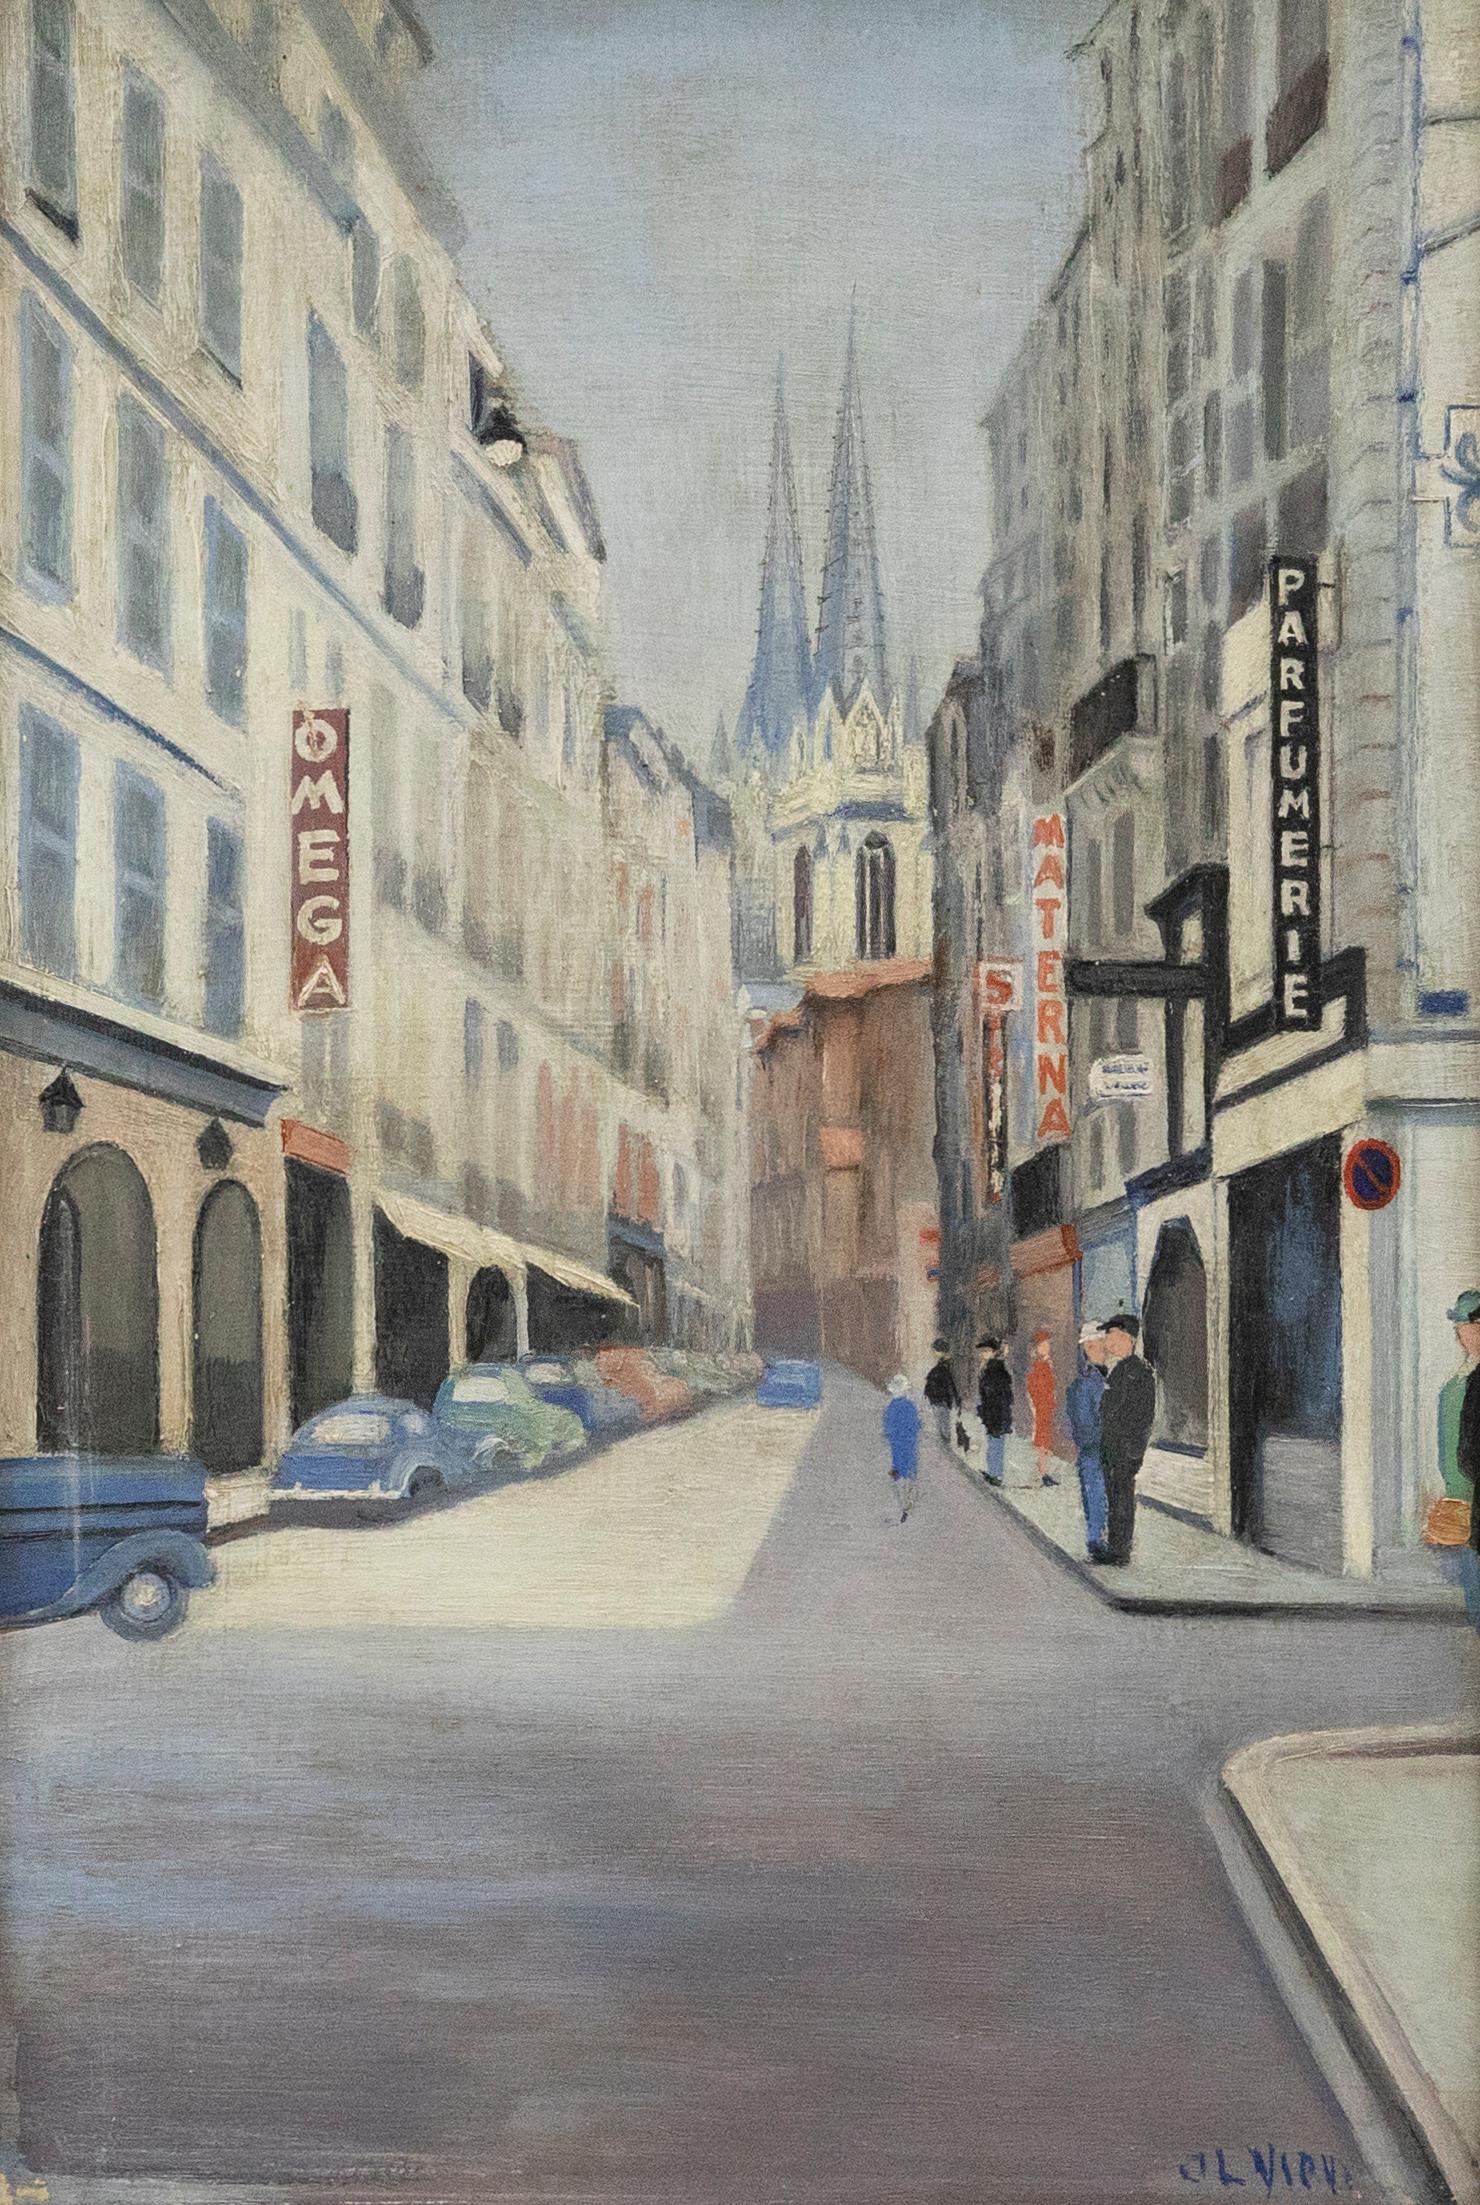 Framed 20th Century Oil - Parisian Street Corner - Painting by Unknown